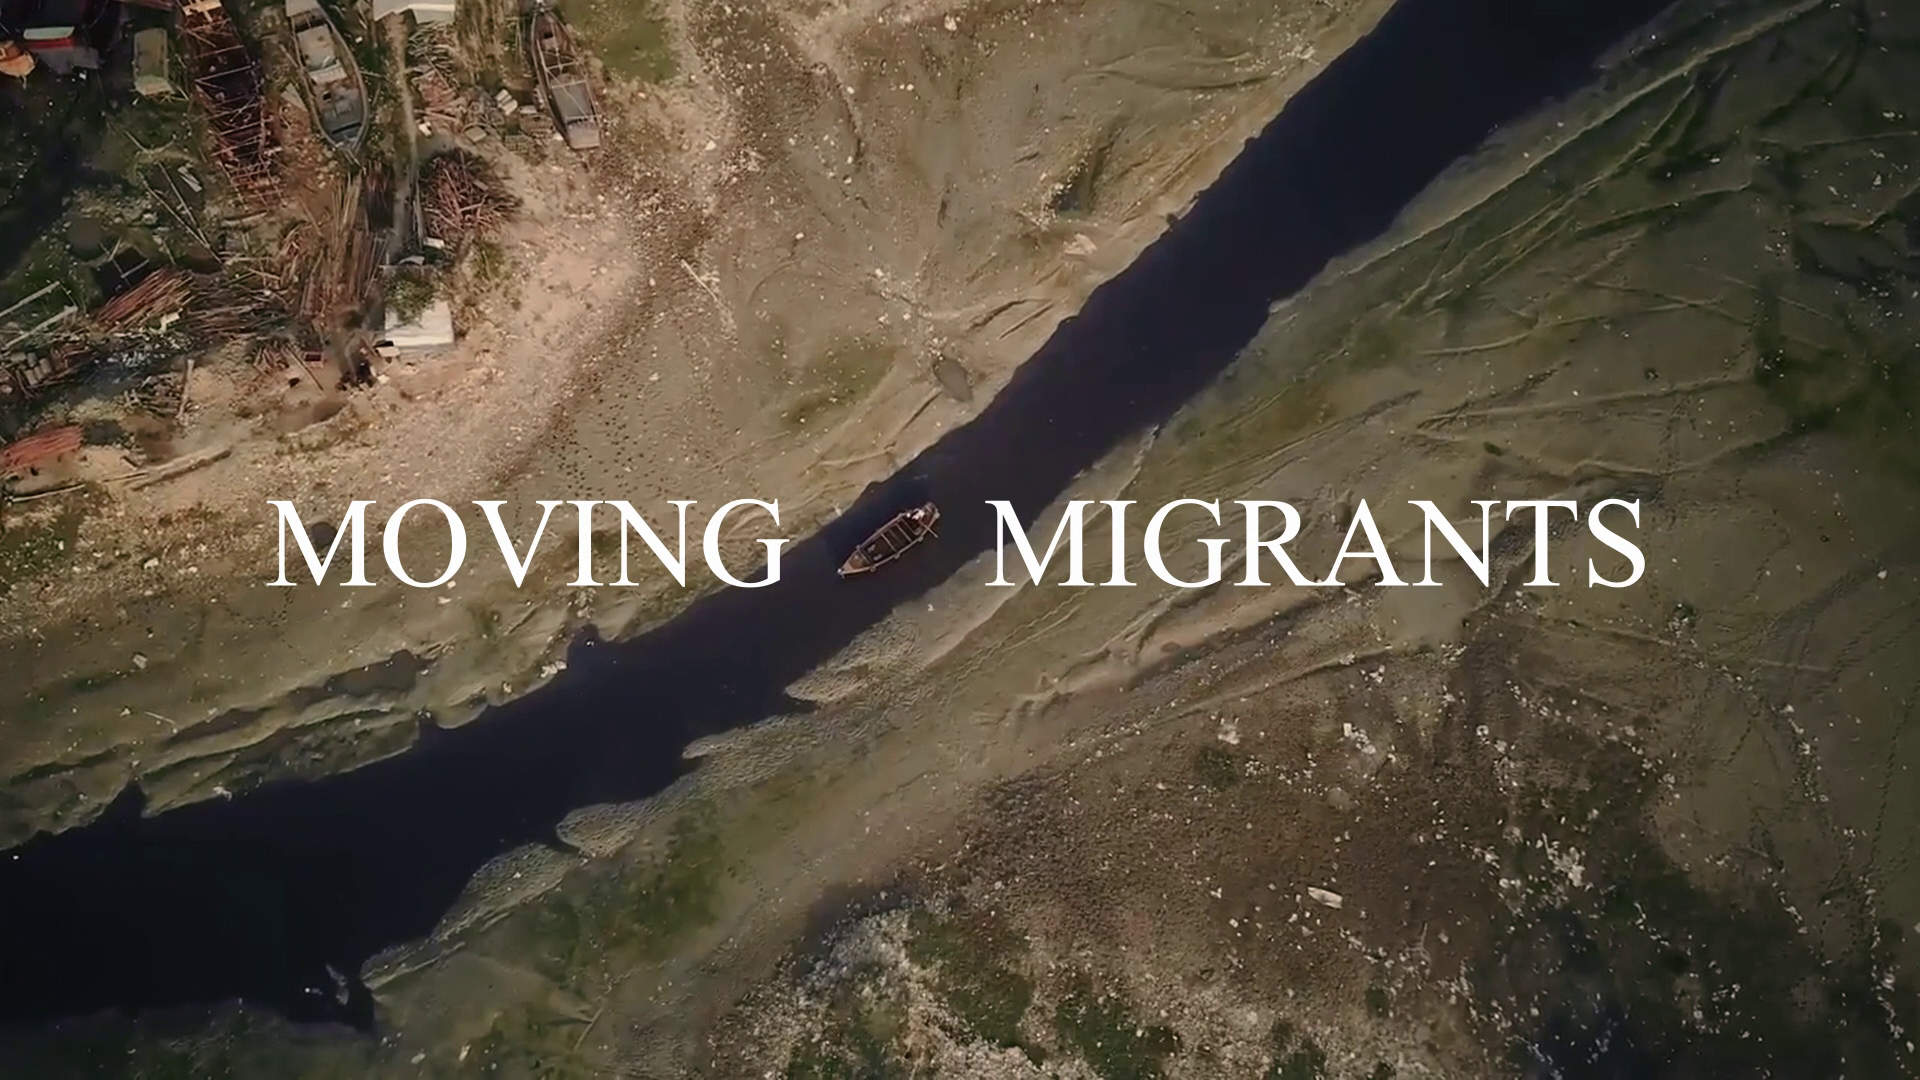 <span  class="uc_style_uc_tiles_grid_image_elementor_uc_items_attribute_title" style="color:#ffffff;">Moving Migrants  Documentary</span>